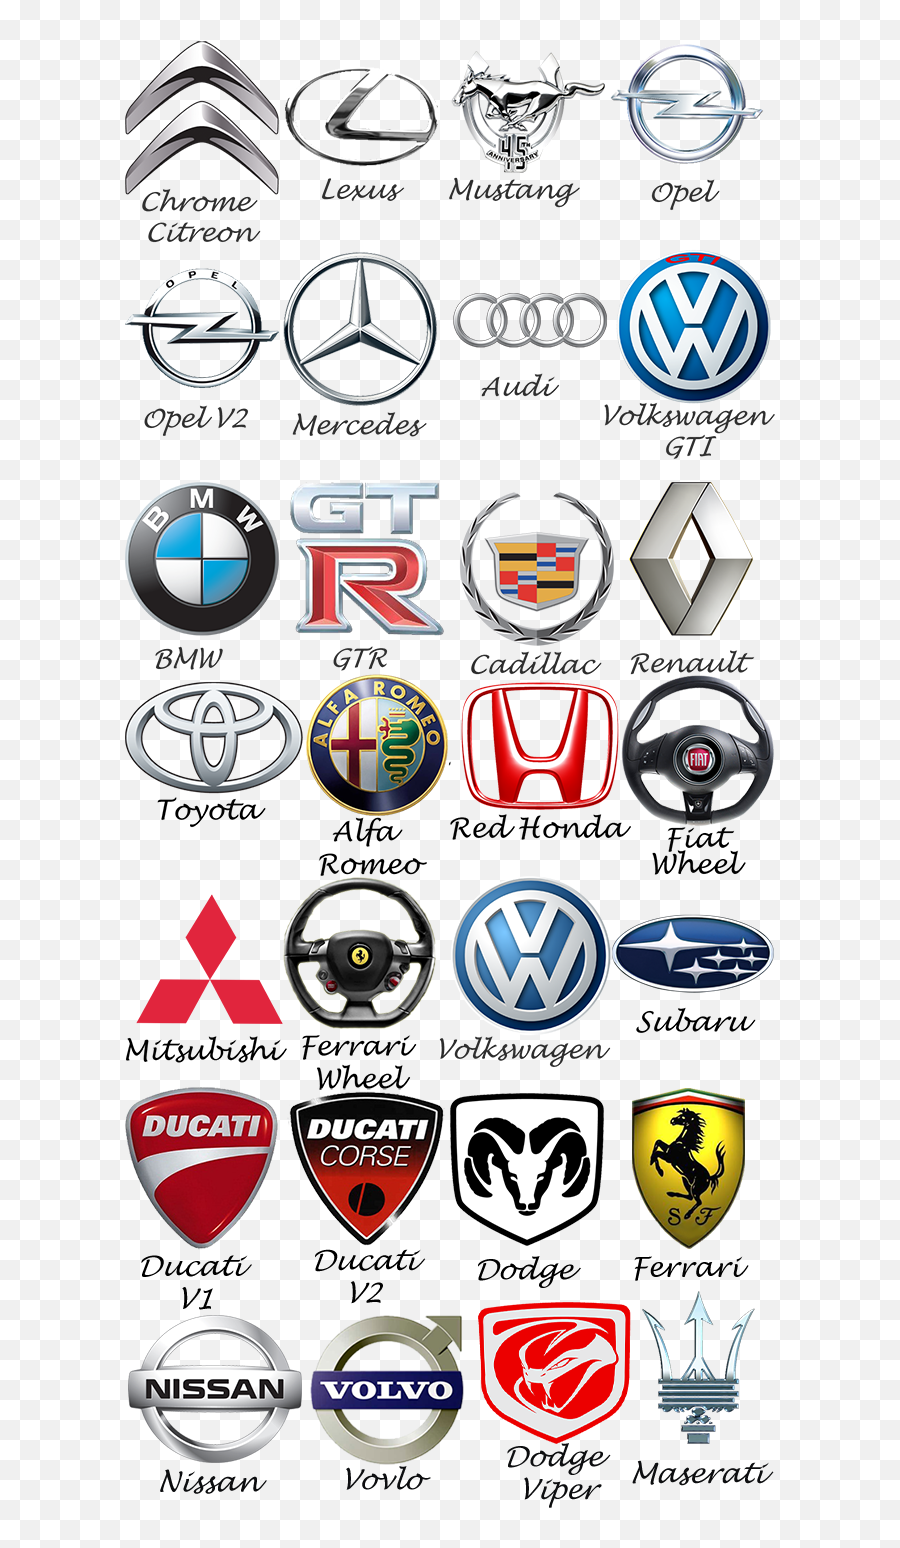 all logos and names